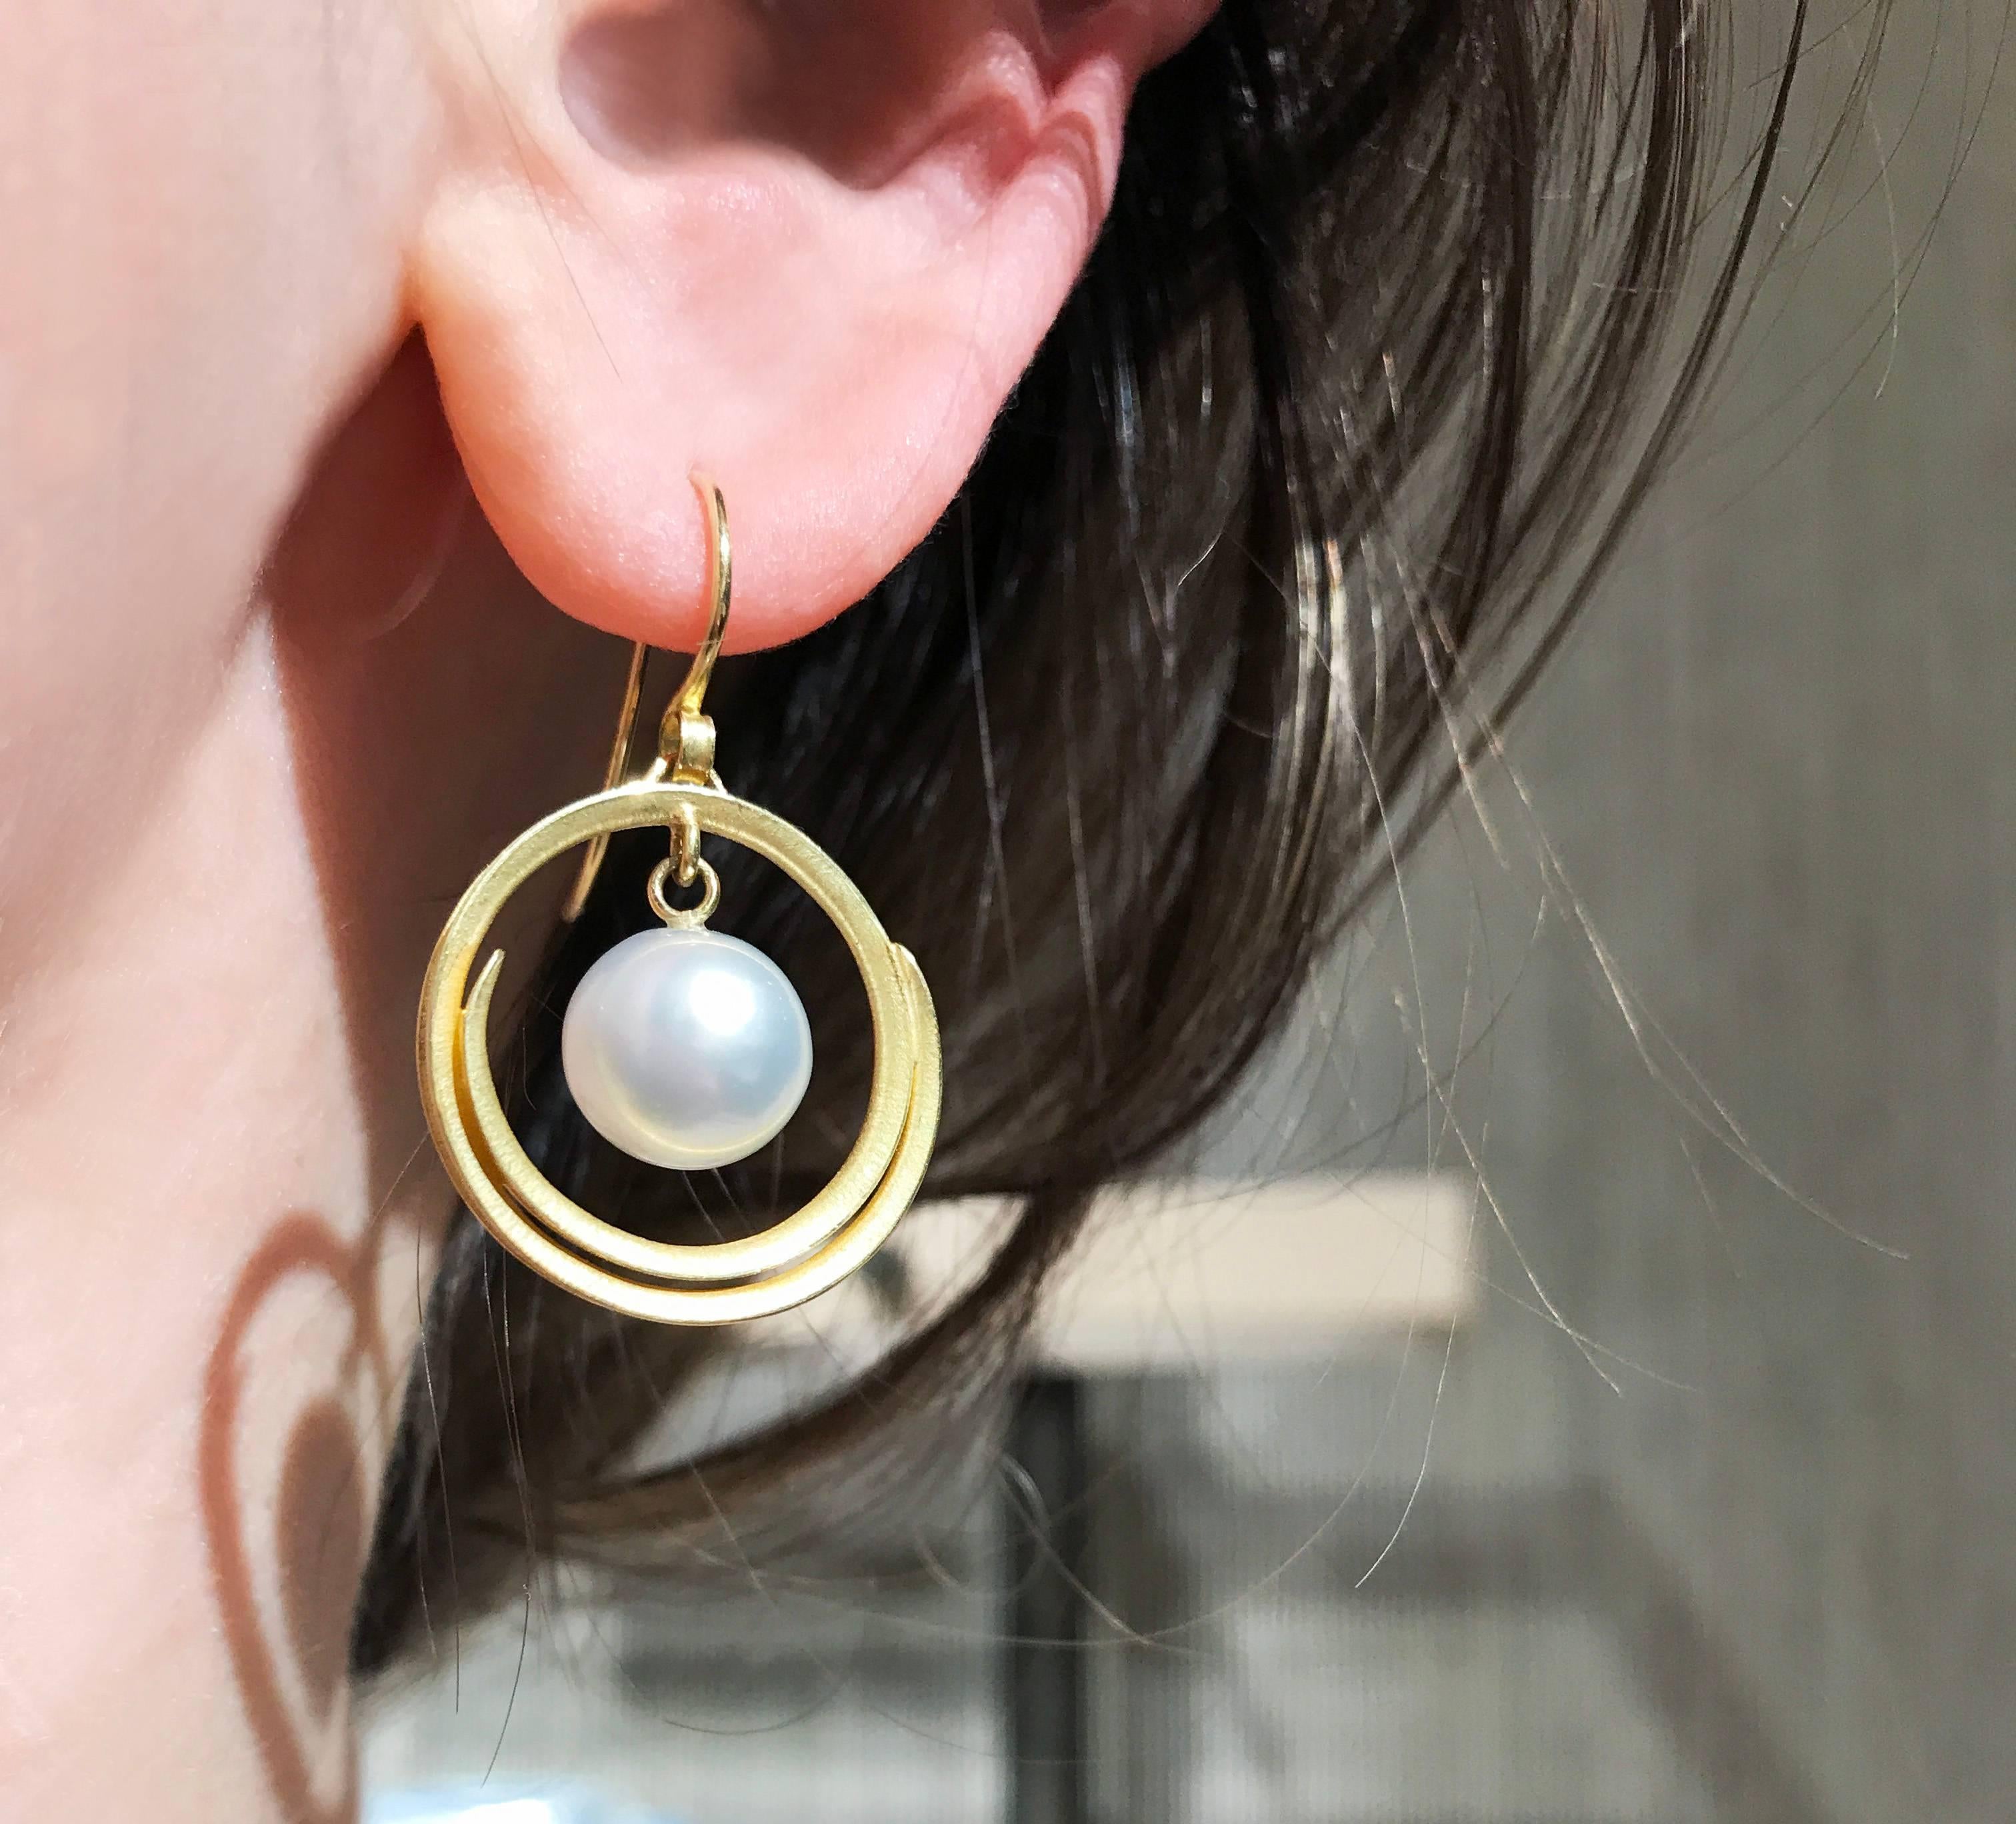 Open Spiral Swirl Drop Earrings handmade by jewelry artist Barbara Heinrich in signature-finished 18k yellow gold featuring two dangling white South Sea pearls and stamped and hallmarked 18k gold wires. 